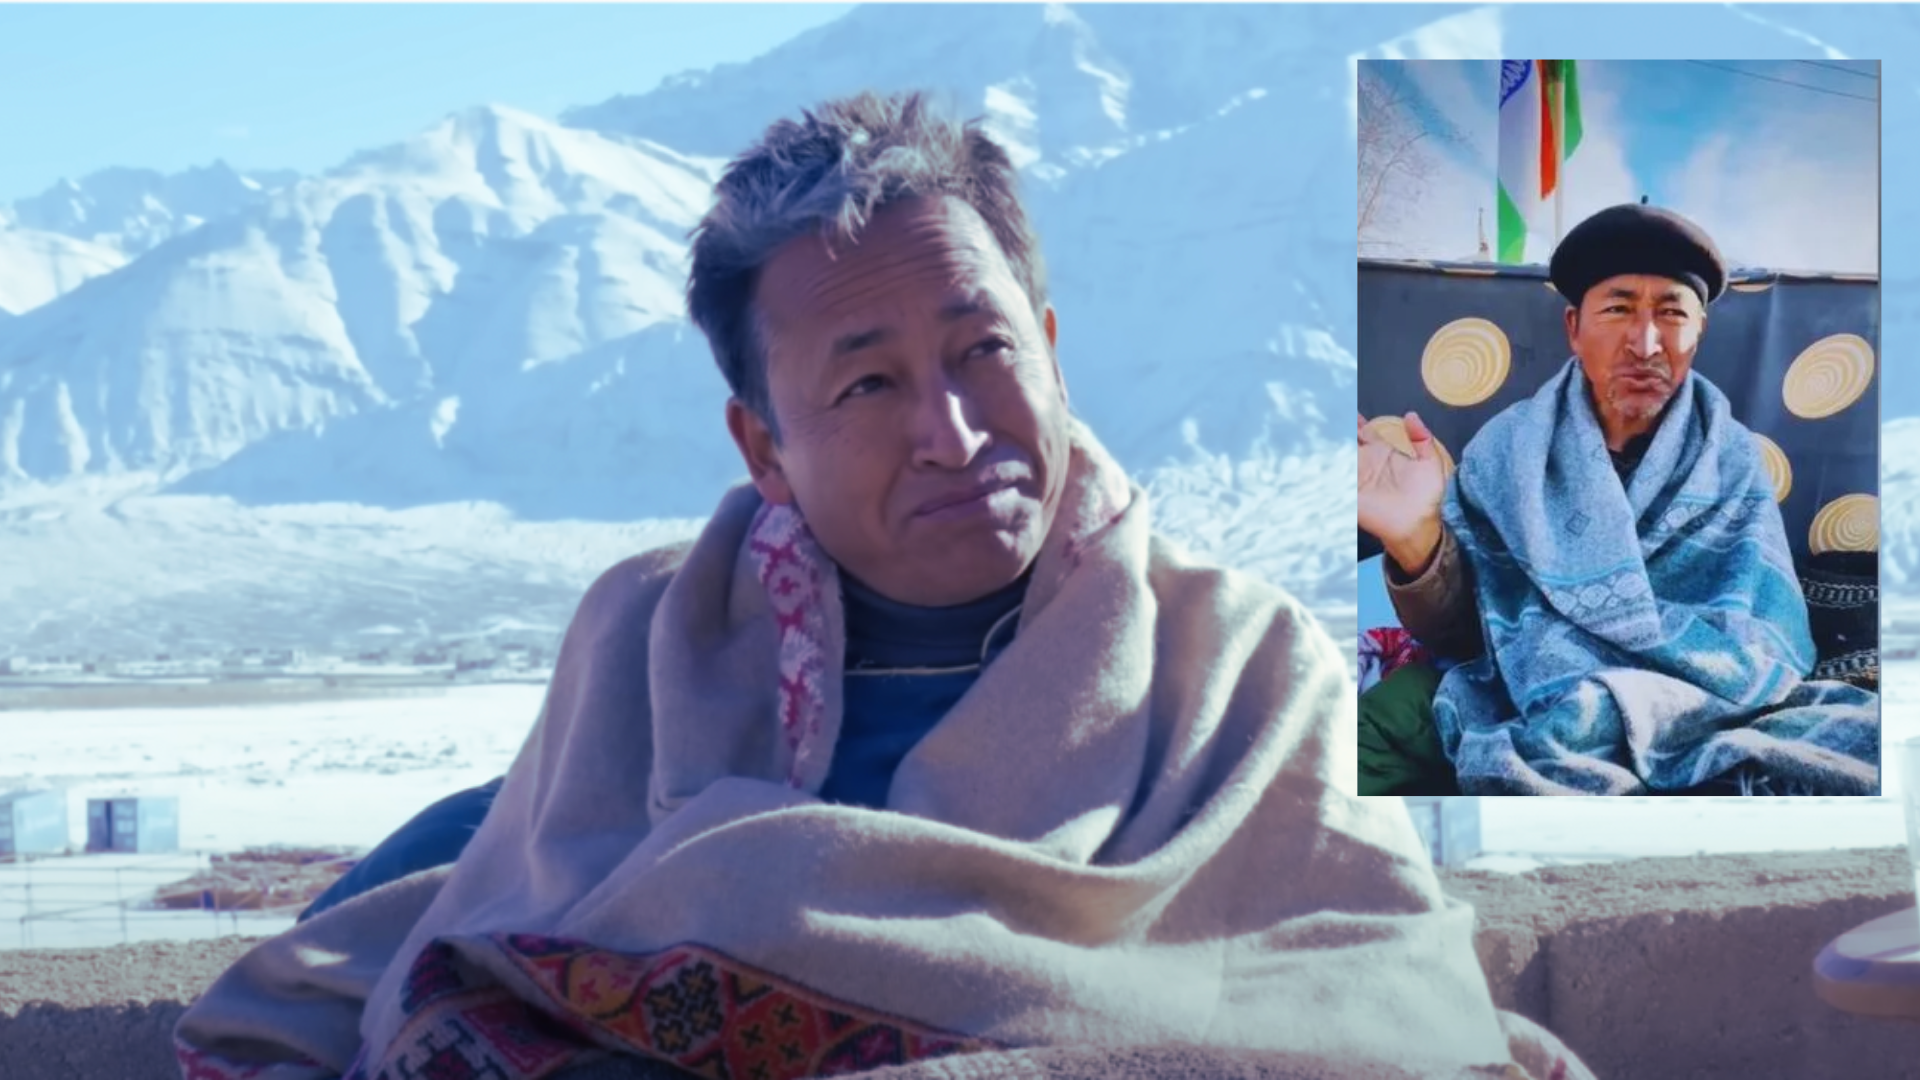 Sonam Wangchuk Reaches 15th Day of Hunger Strike, Who Is He?